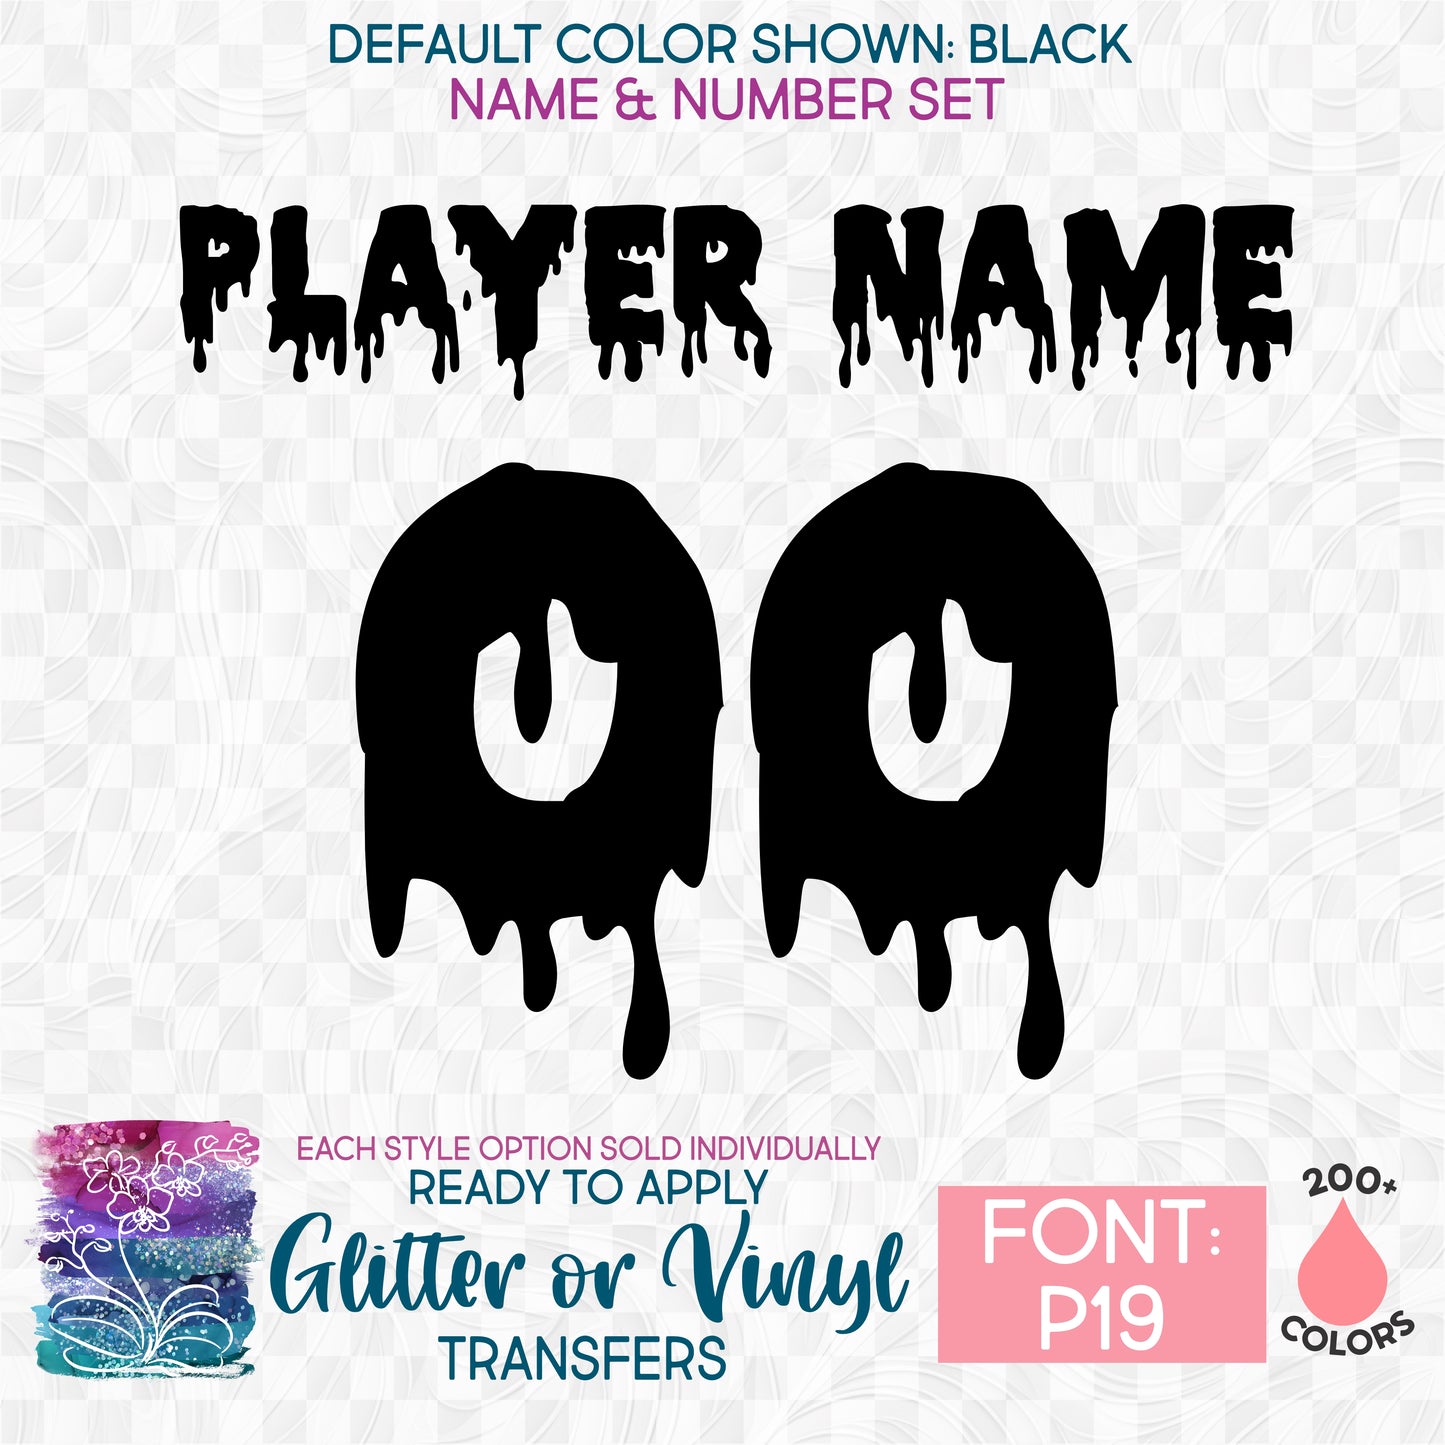 (s097-P19) Custom Player Perfect Name & Number Glitter or Vinyl Iron-On Transfer